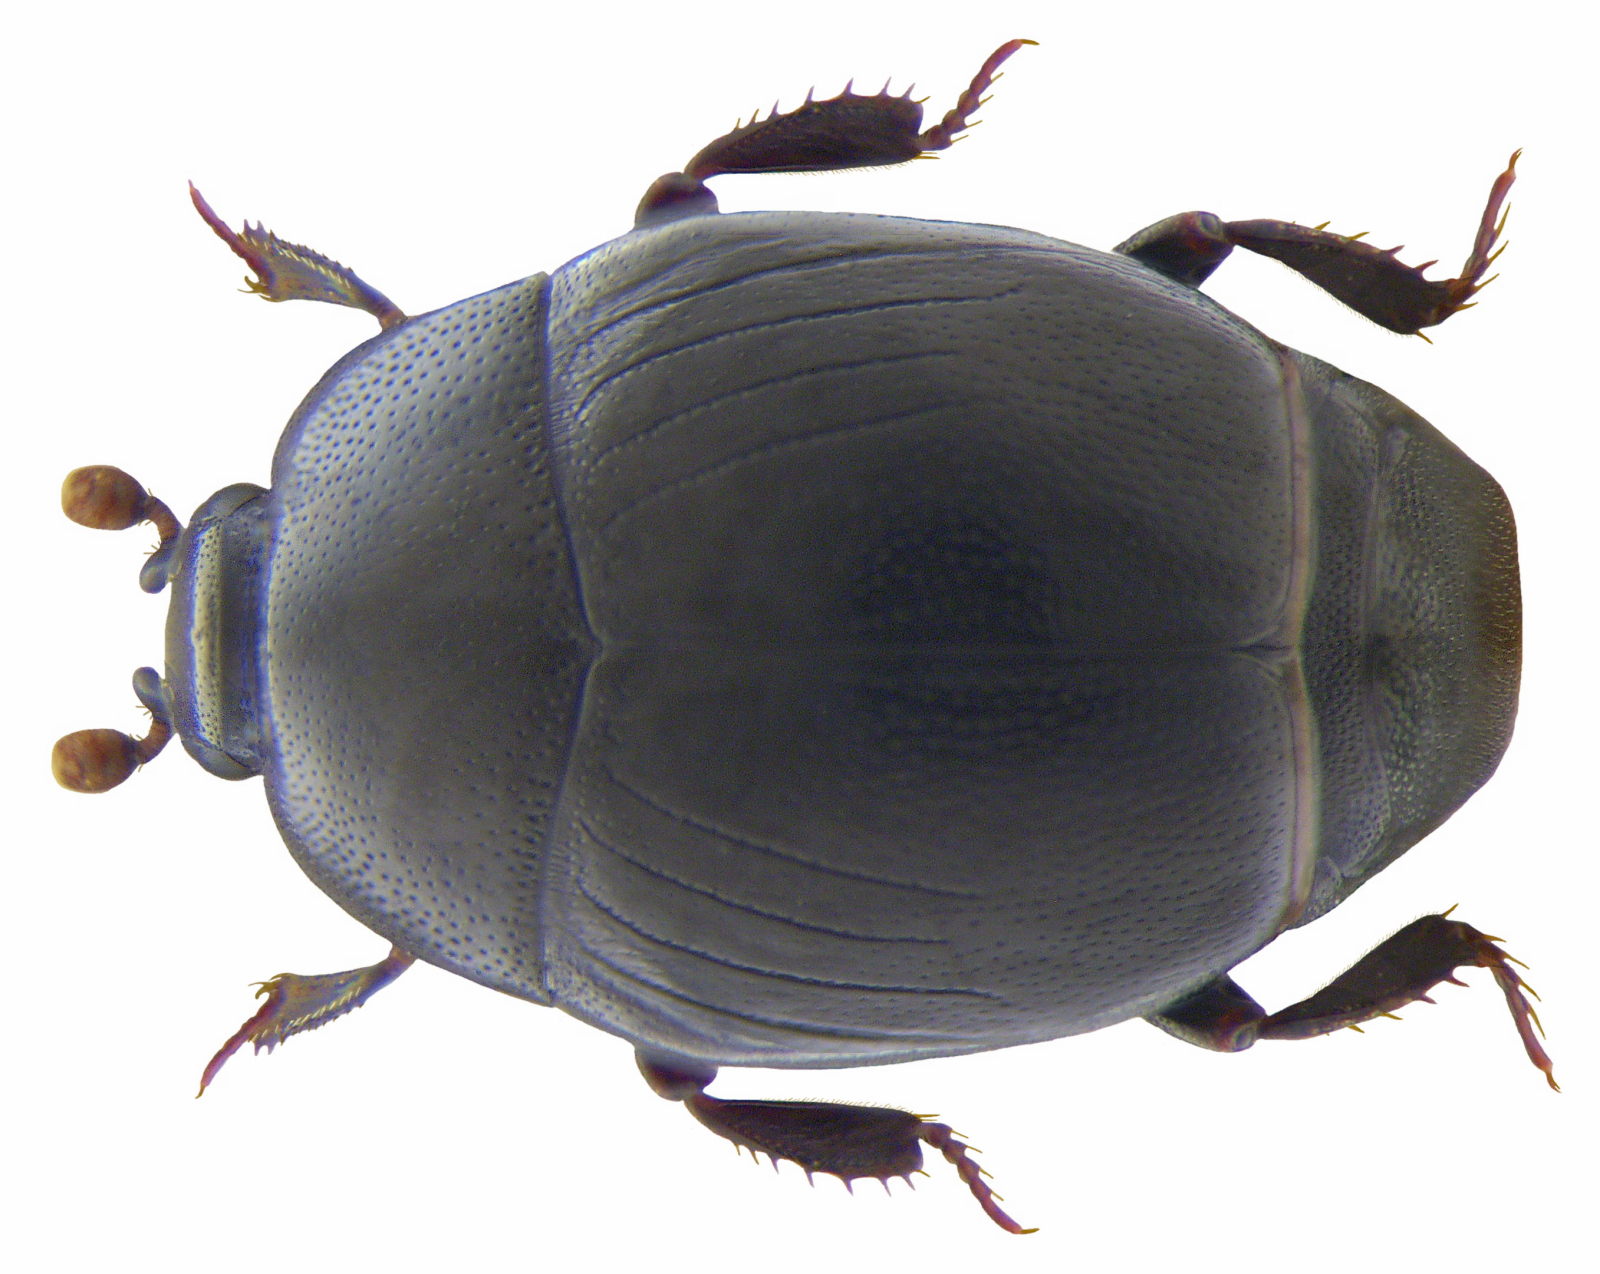 Histeridae, CC-BY-SA-2.0, Udo Schmidt, Germany, https://www.flickr.com/photos/coleoptera-us/